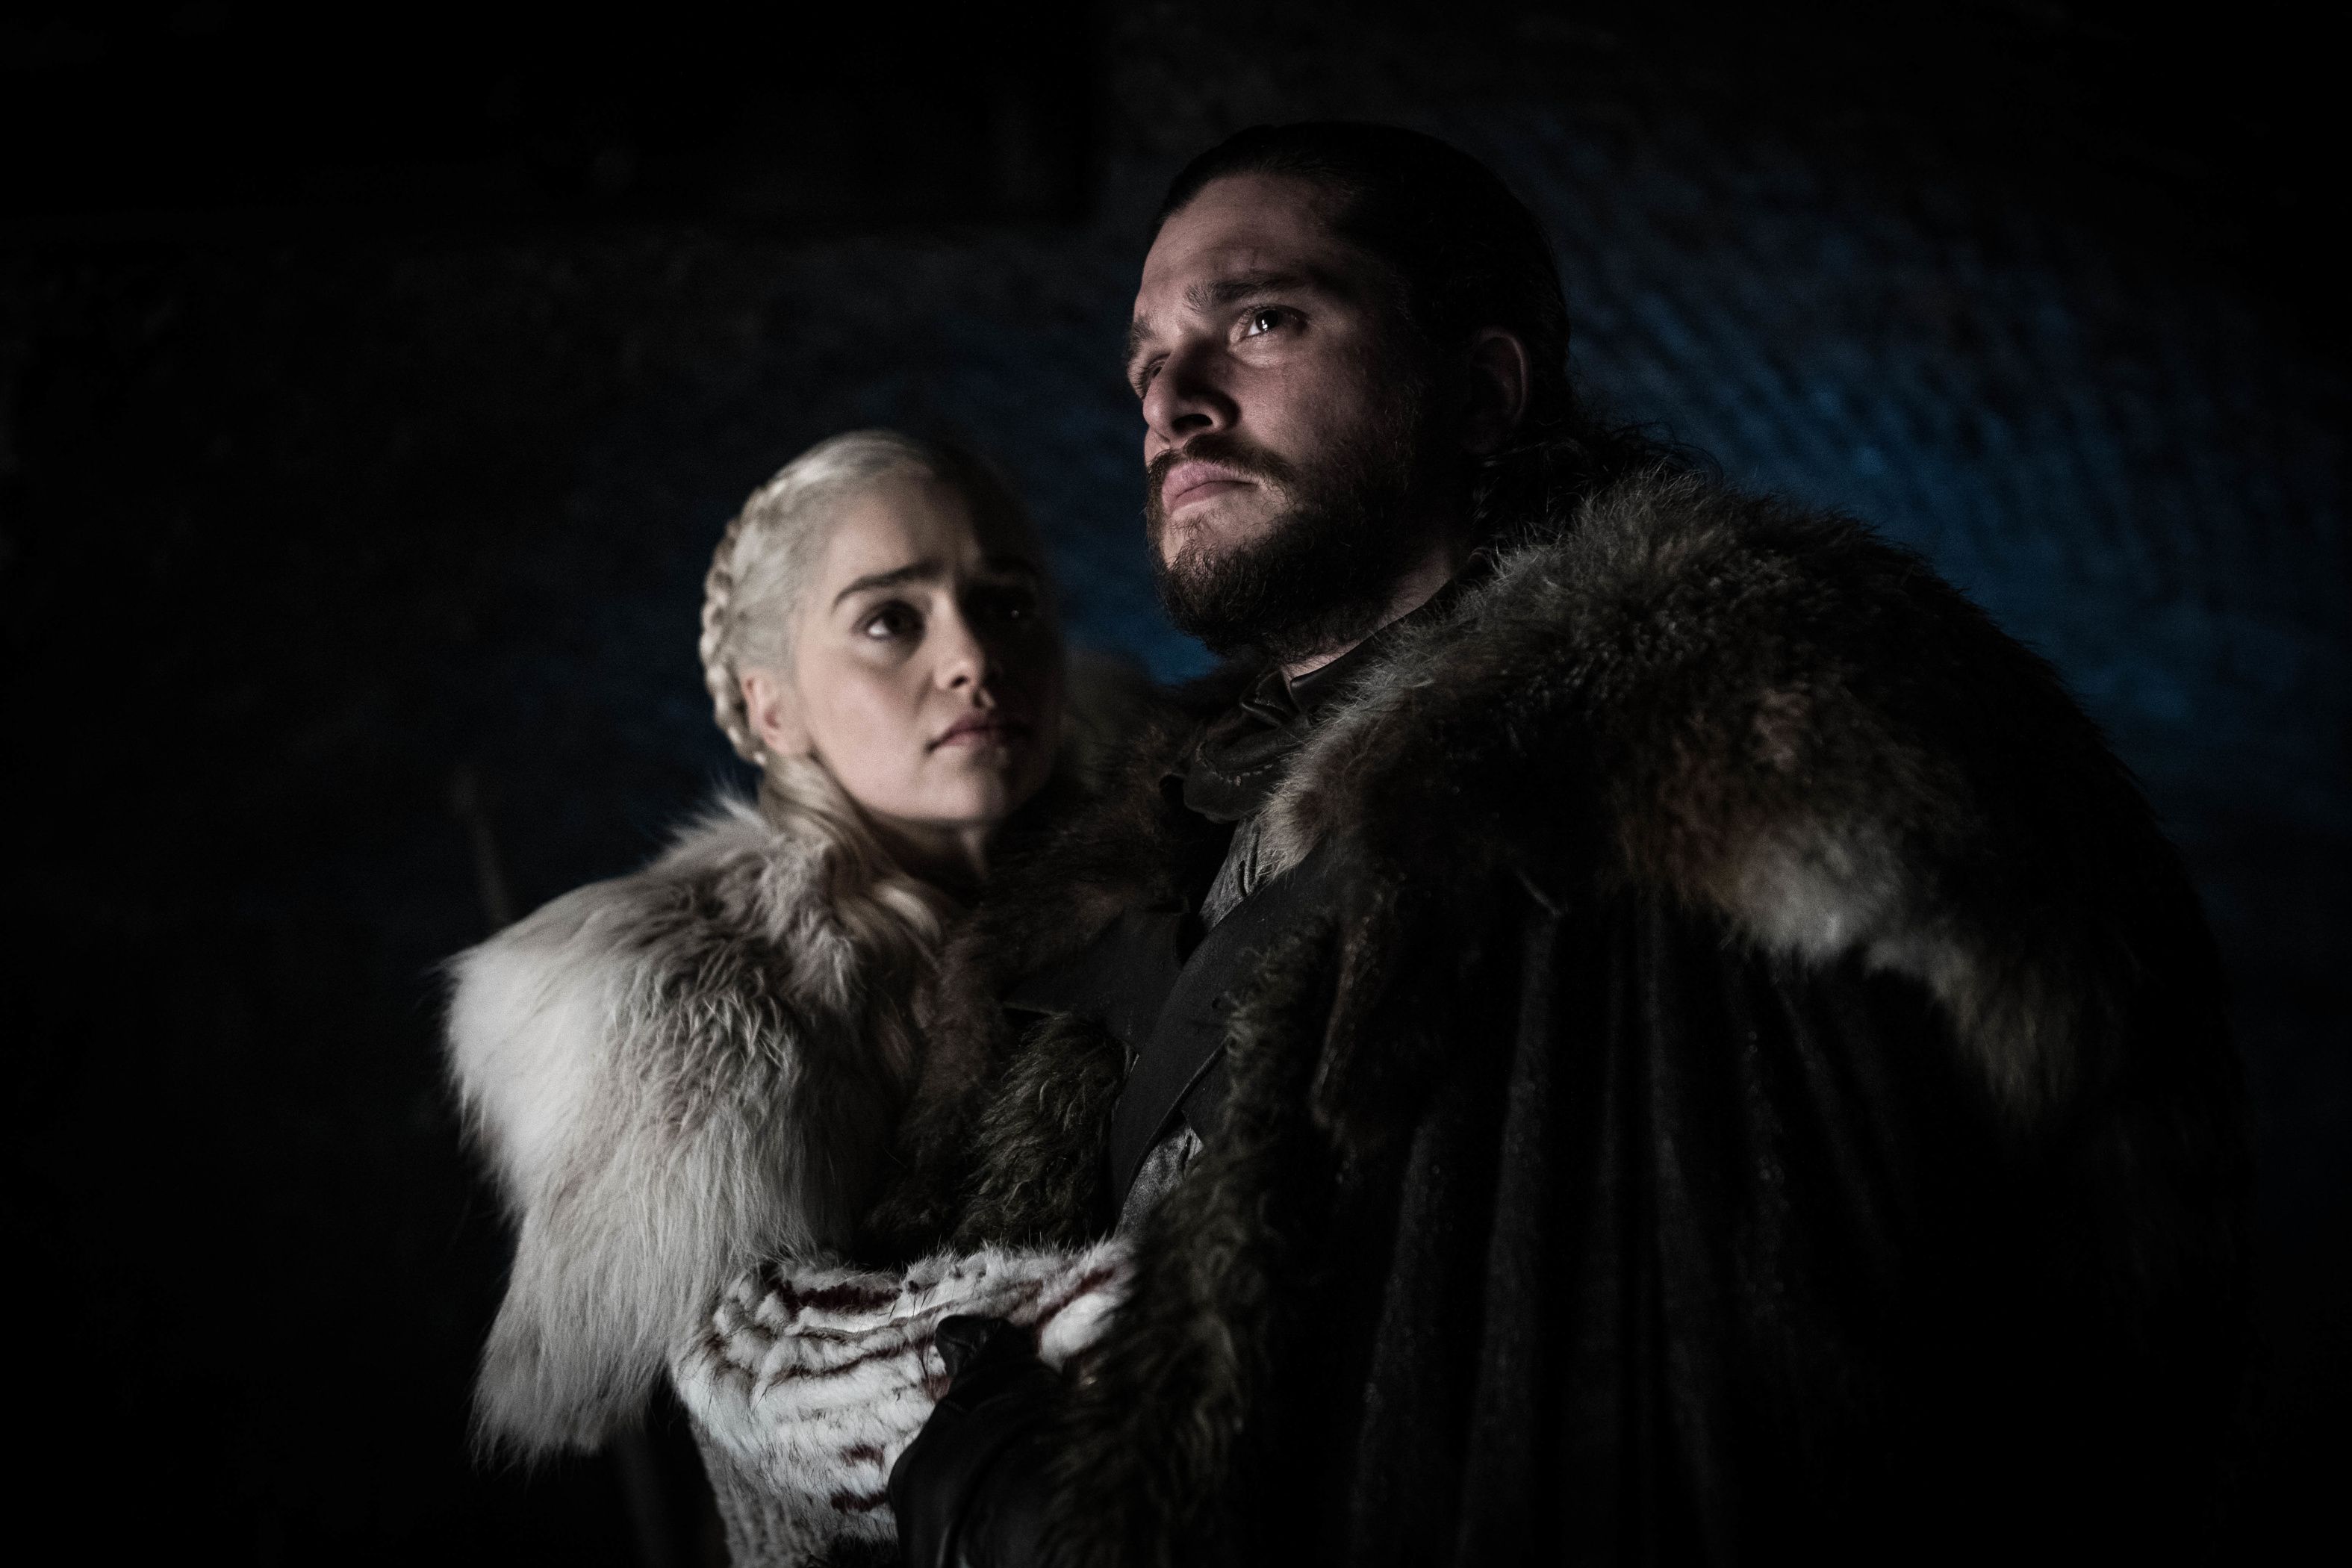 I Blackmail My Cousin For Sex Videos - Game of Thrones: Jon and Dany's Incest Is Creepy, Right?